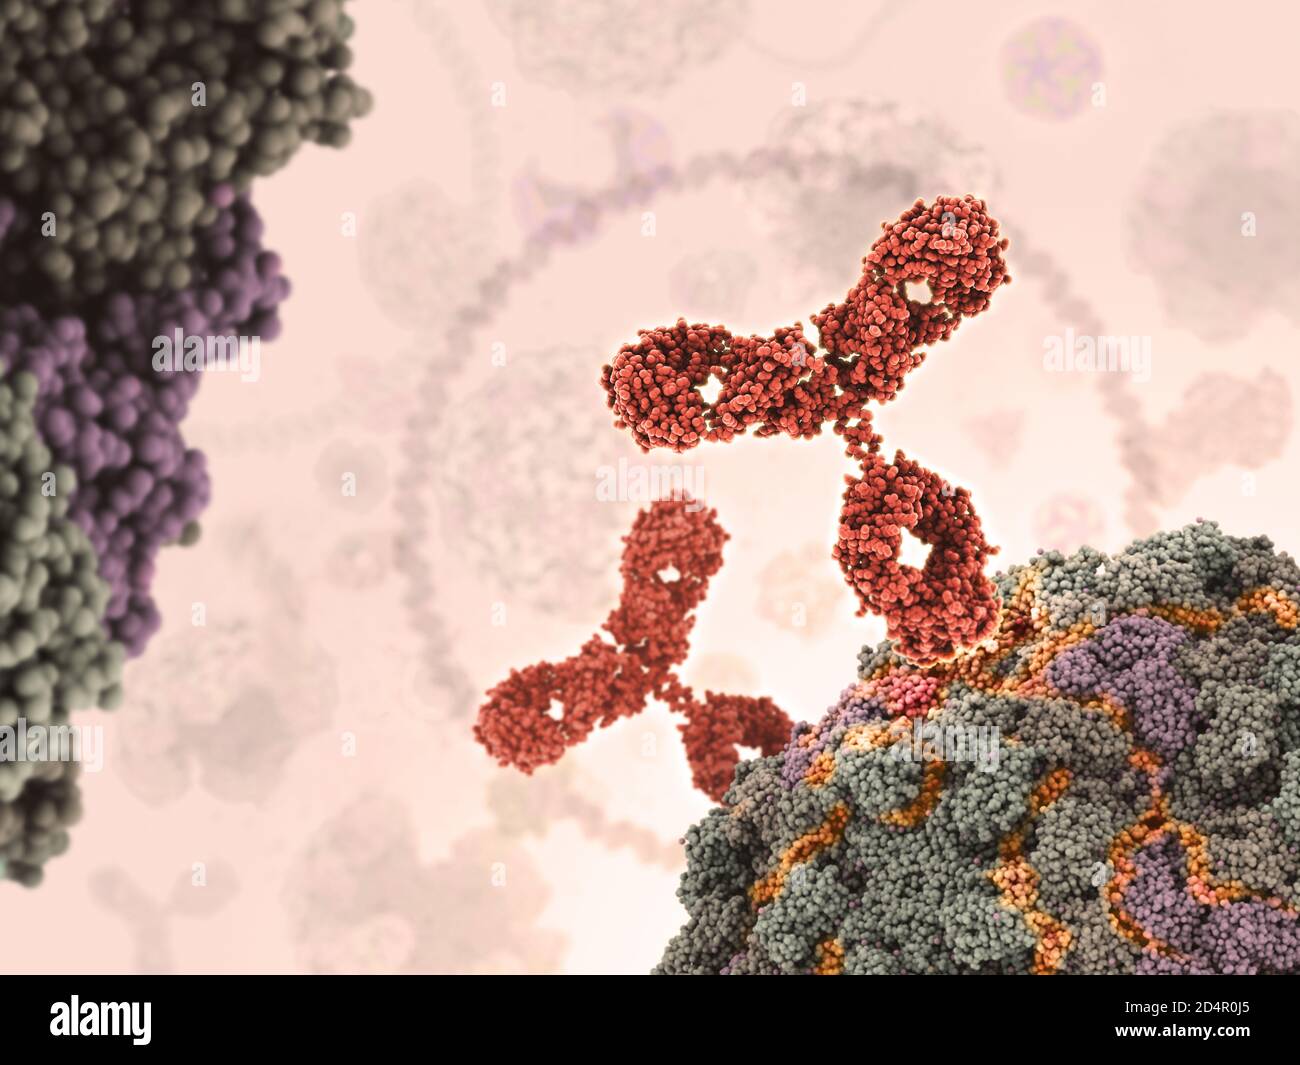 Human antibodies (red) attacking a virus by binding to specific sites. Stock Photo